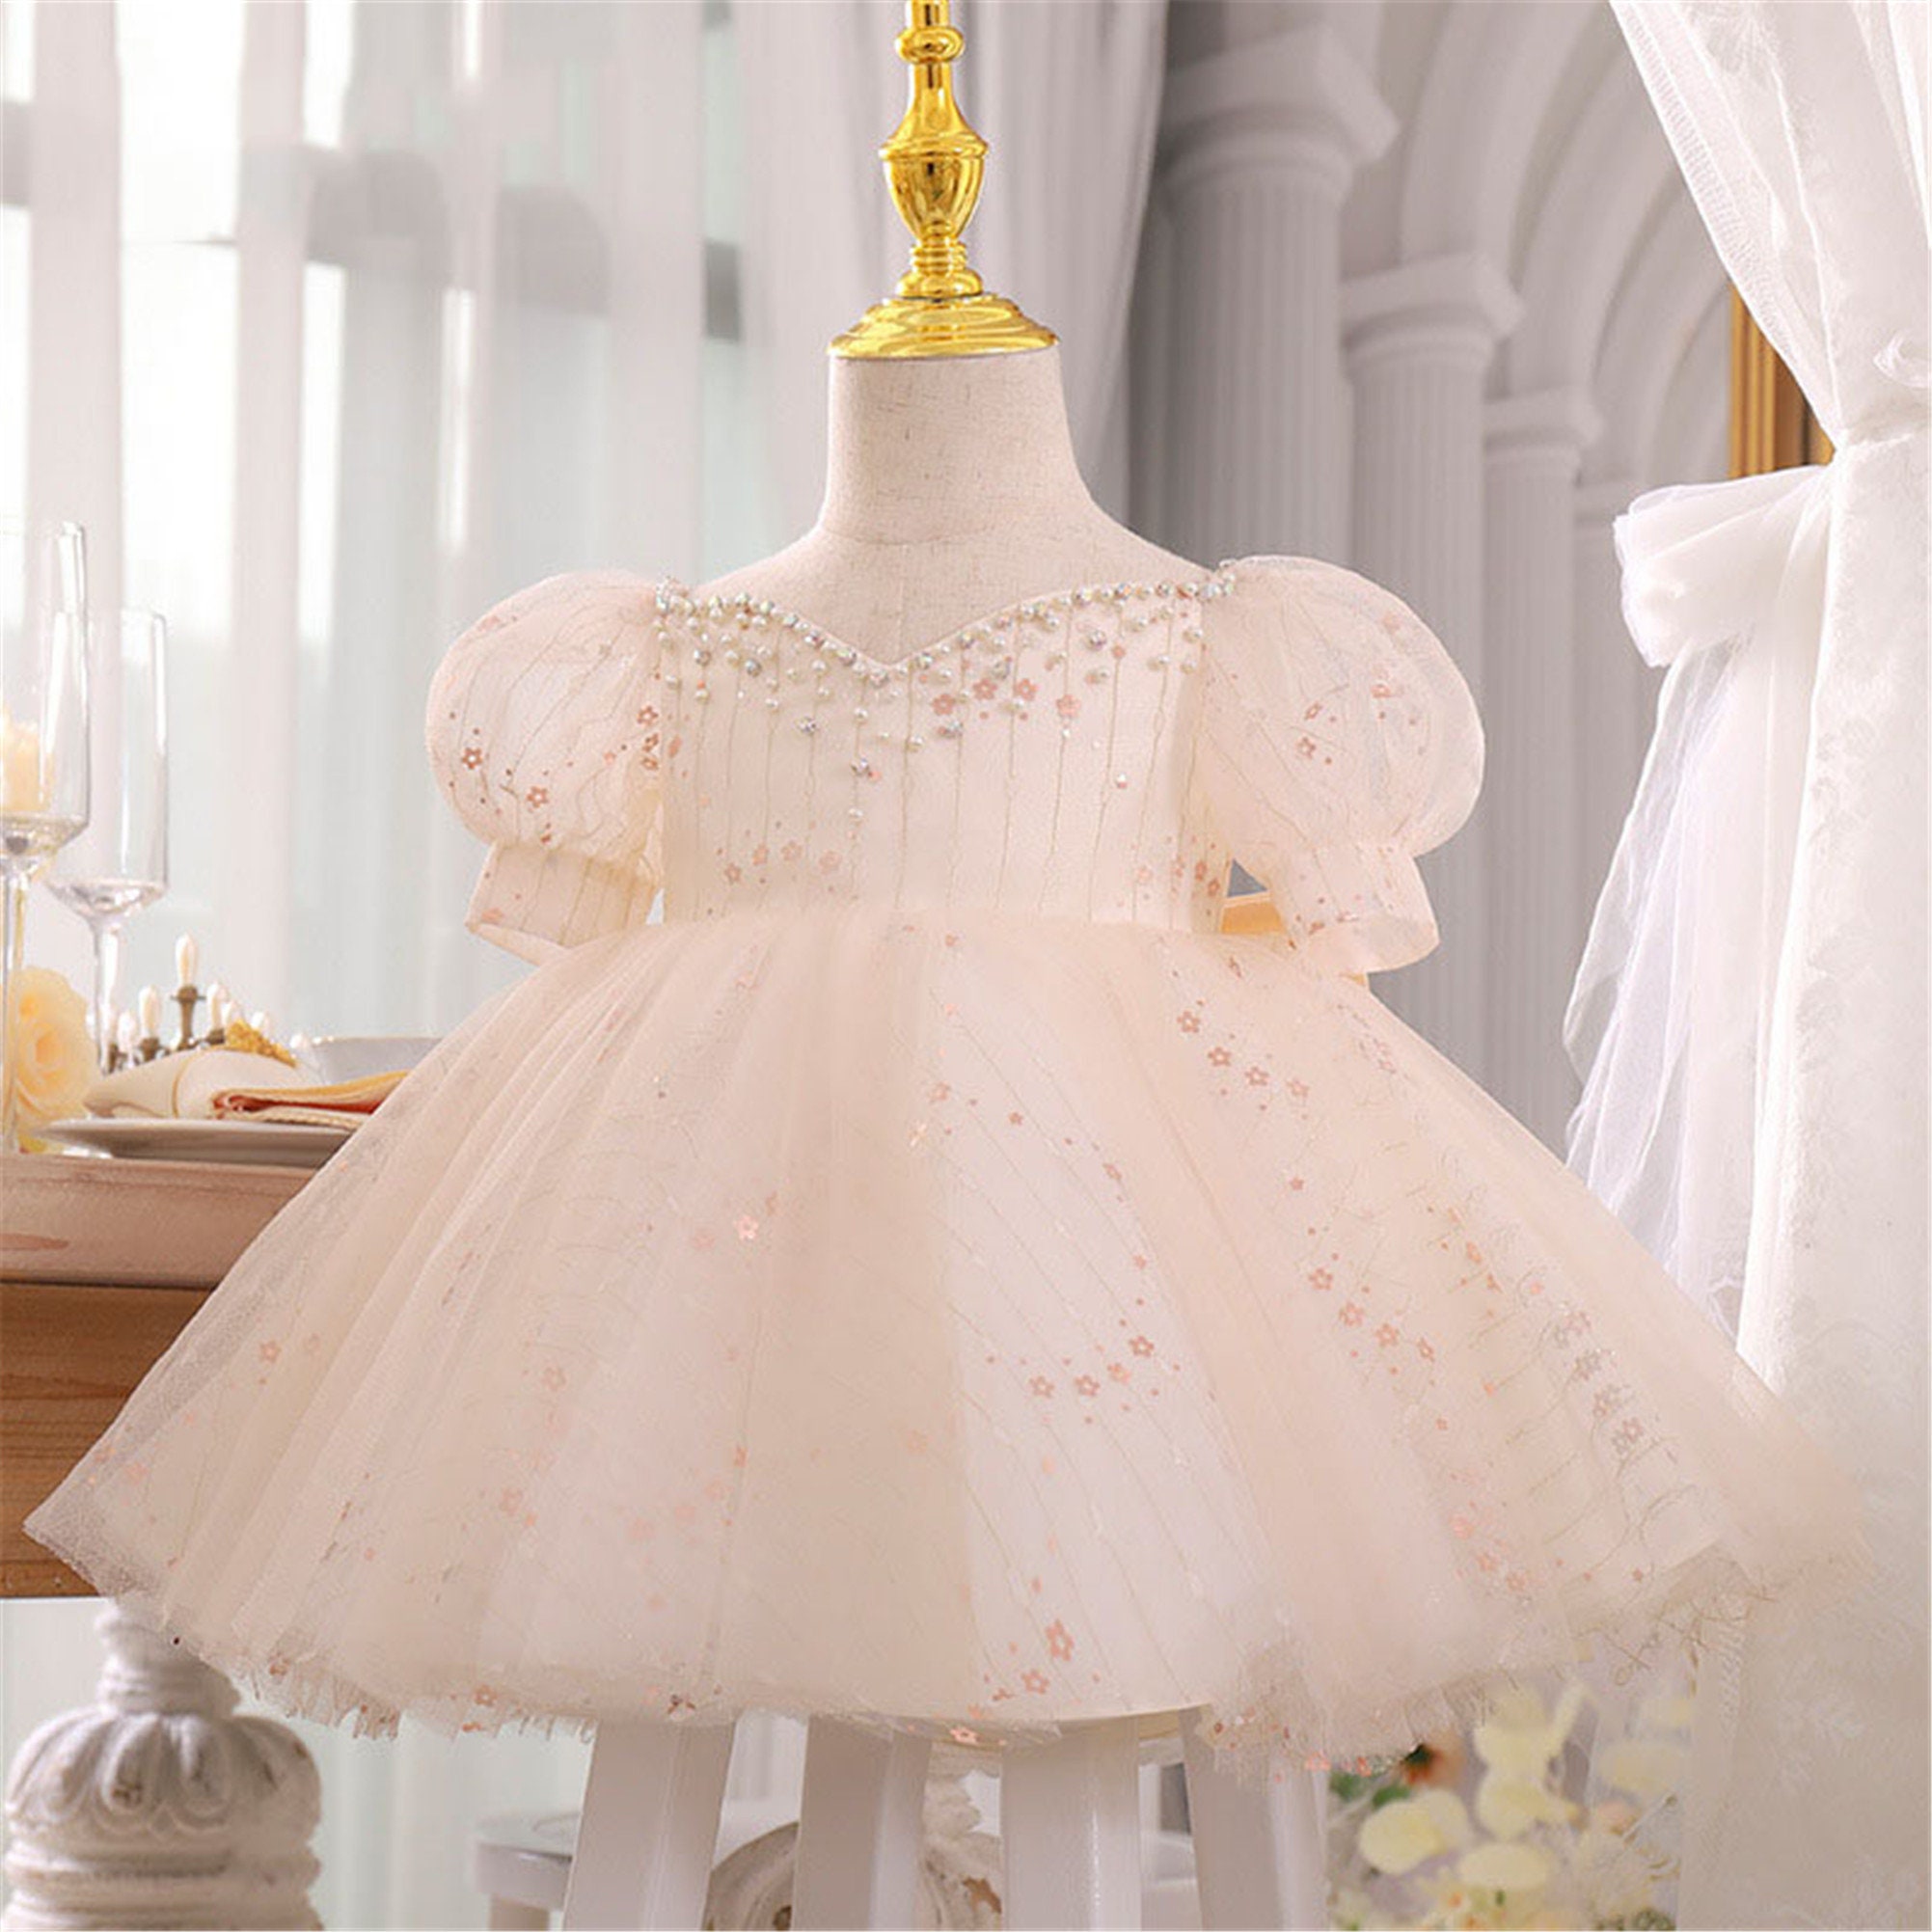 Baby Girl Birthday Dress Light Champagne Tulle Dress With - Etsy